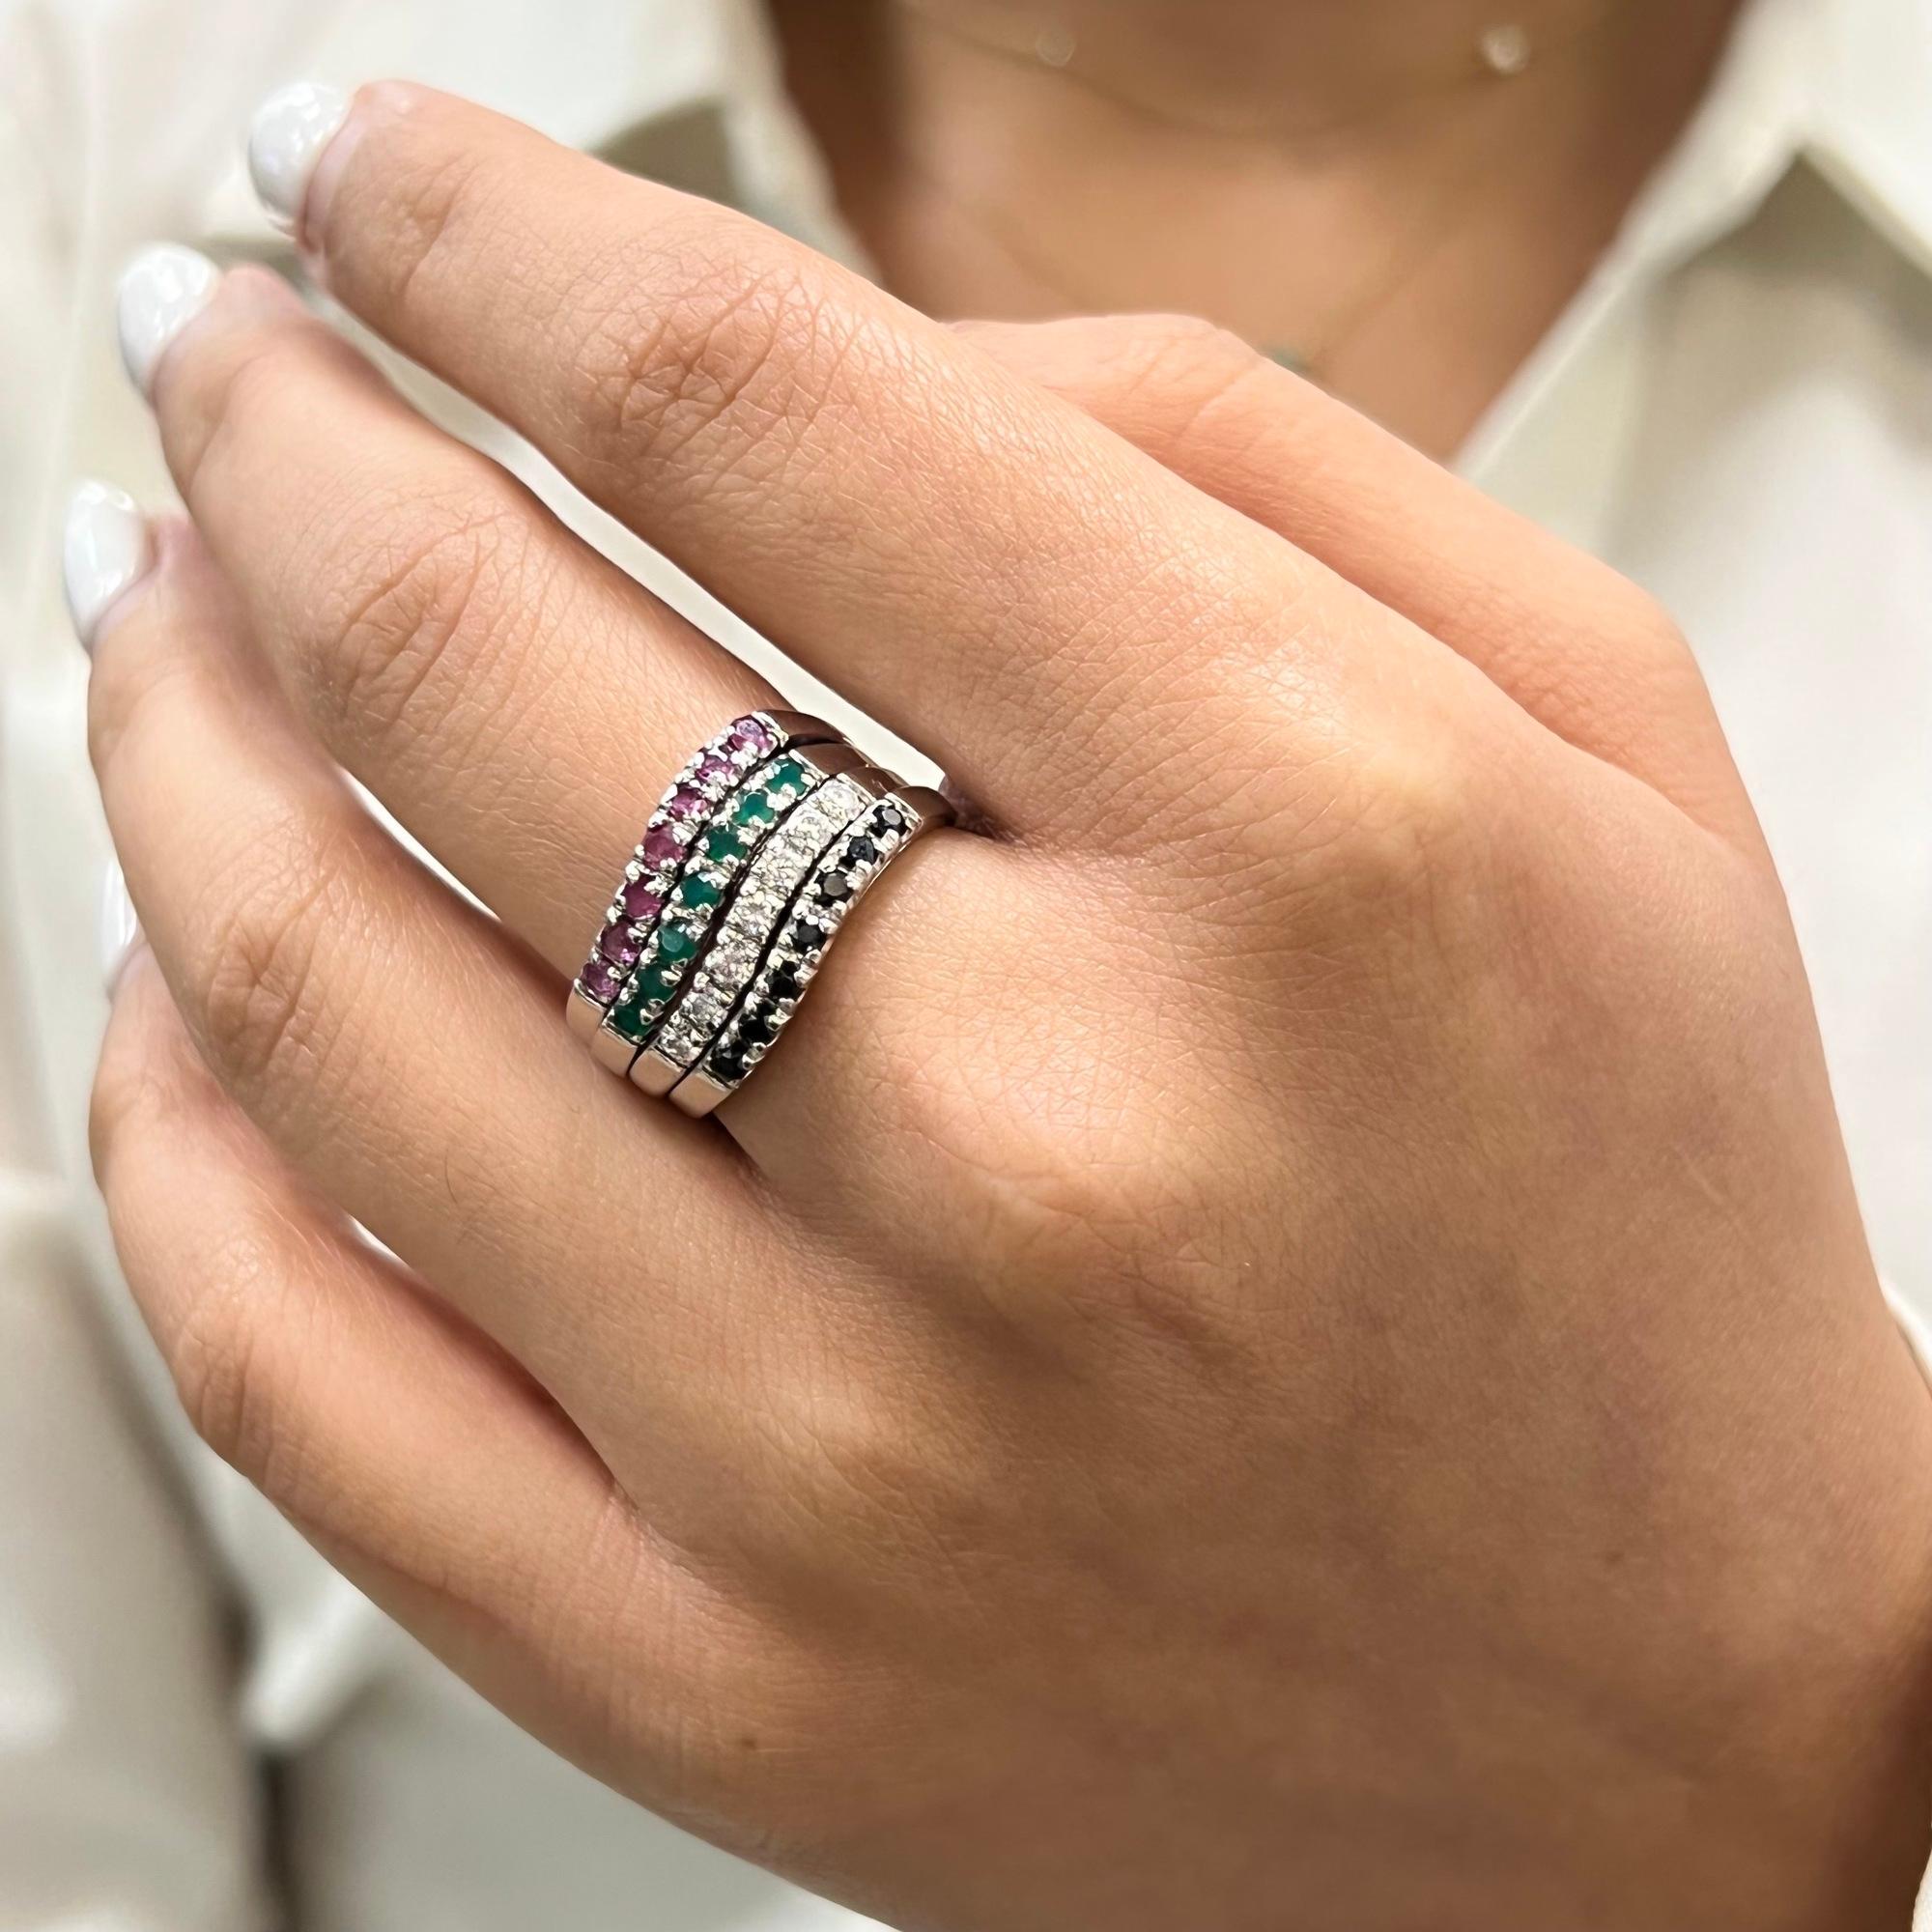 This stunning multi band ring comes with various forms of gem set bands held together. It features four bands encrusted with Ruby, Emerald, Diamond and Blue Sapphire. Each band width: 2.5mm. Ring size: 9. Total weight: 9.64. Great pre-owned